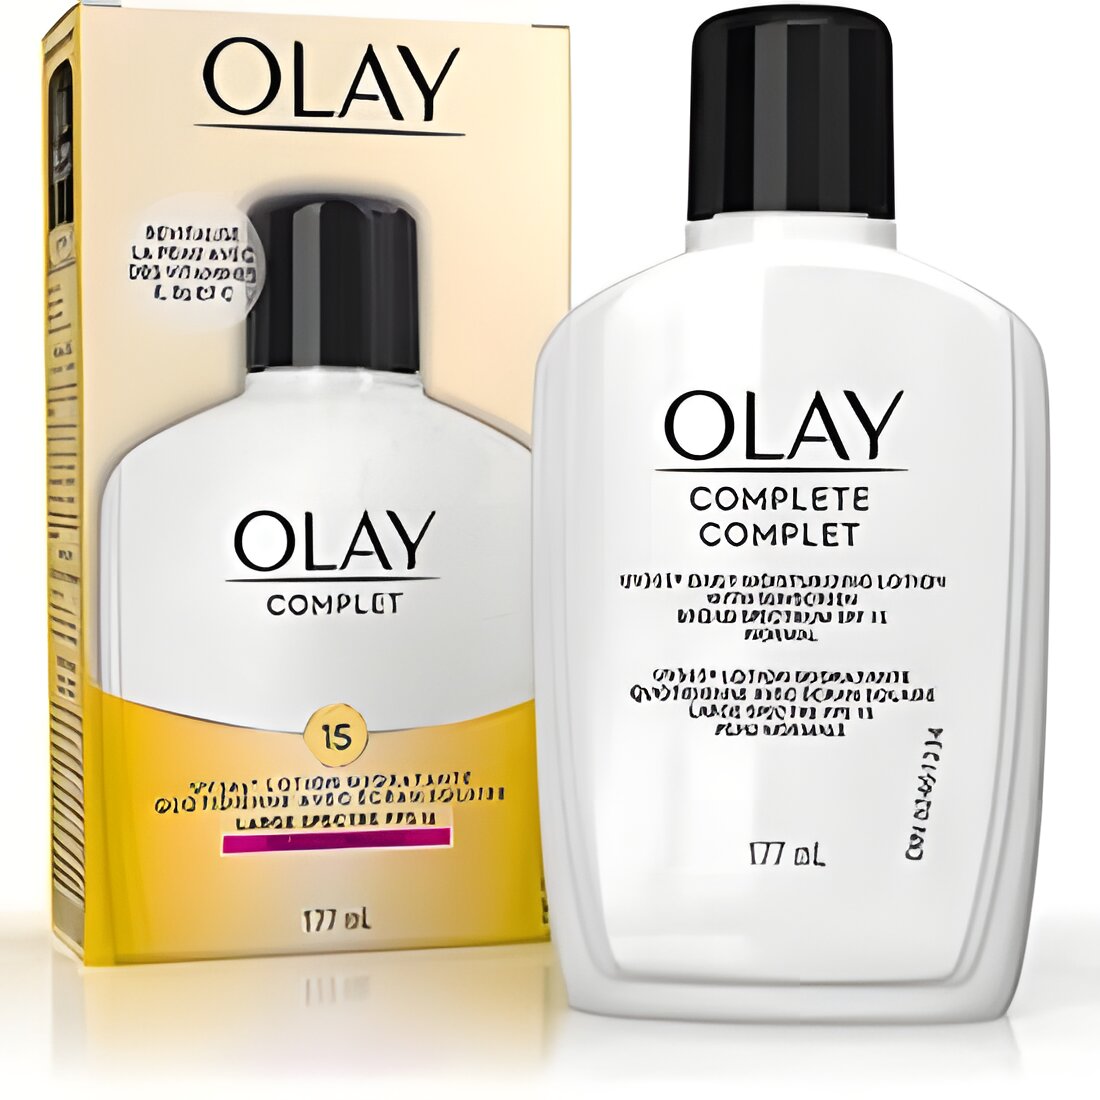 Free Olay Complete All Day Moisturizer